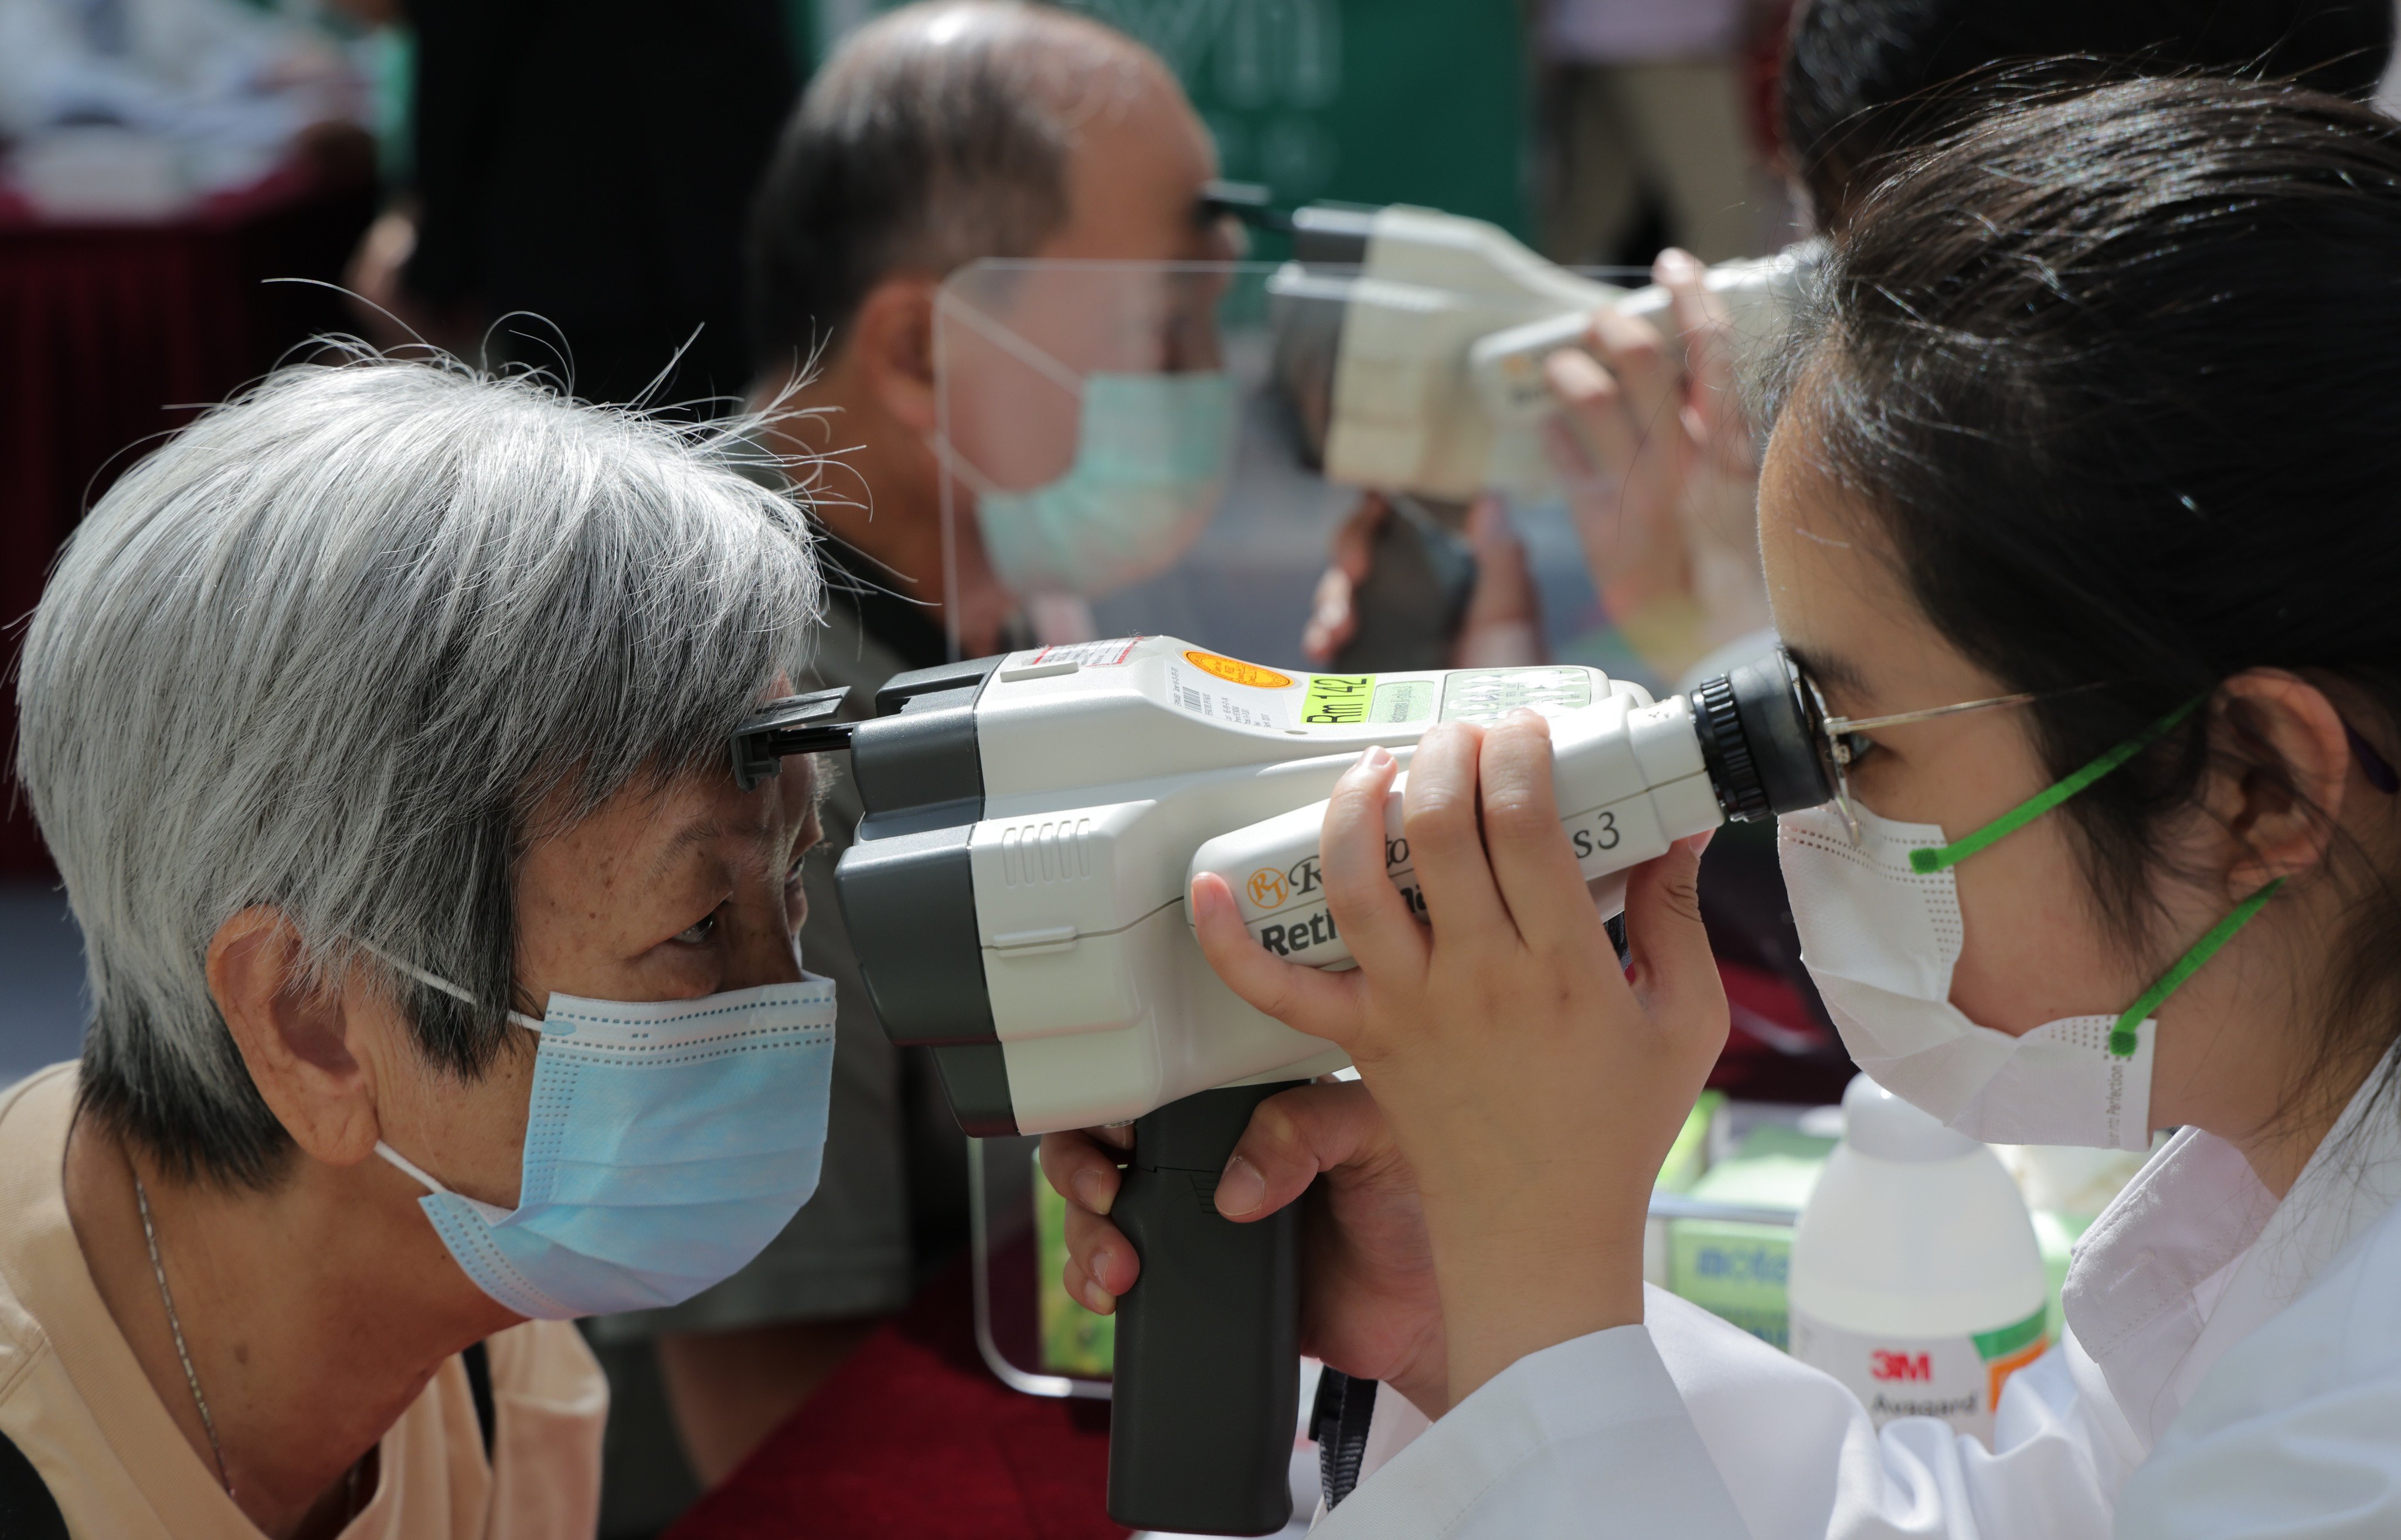 A visitor gets her eyes checked at a health event. Publicly funded comprehensive eye screenings are not widely available in Hong Kong at present. Photo: Jelly Tse